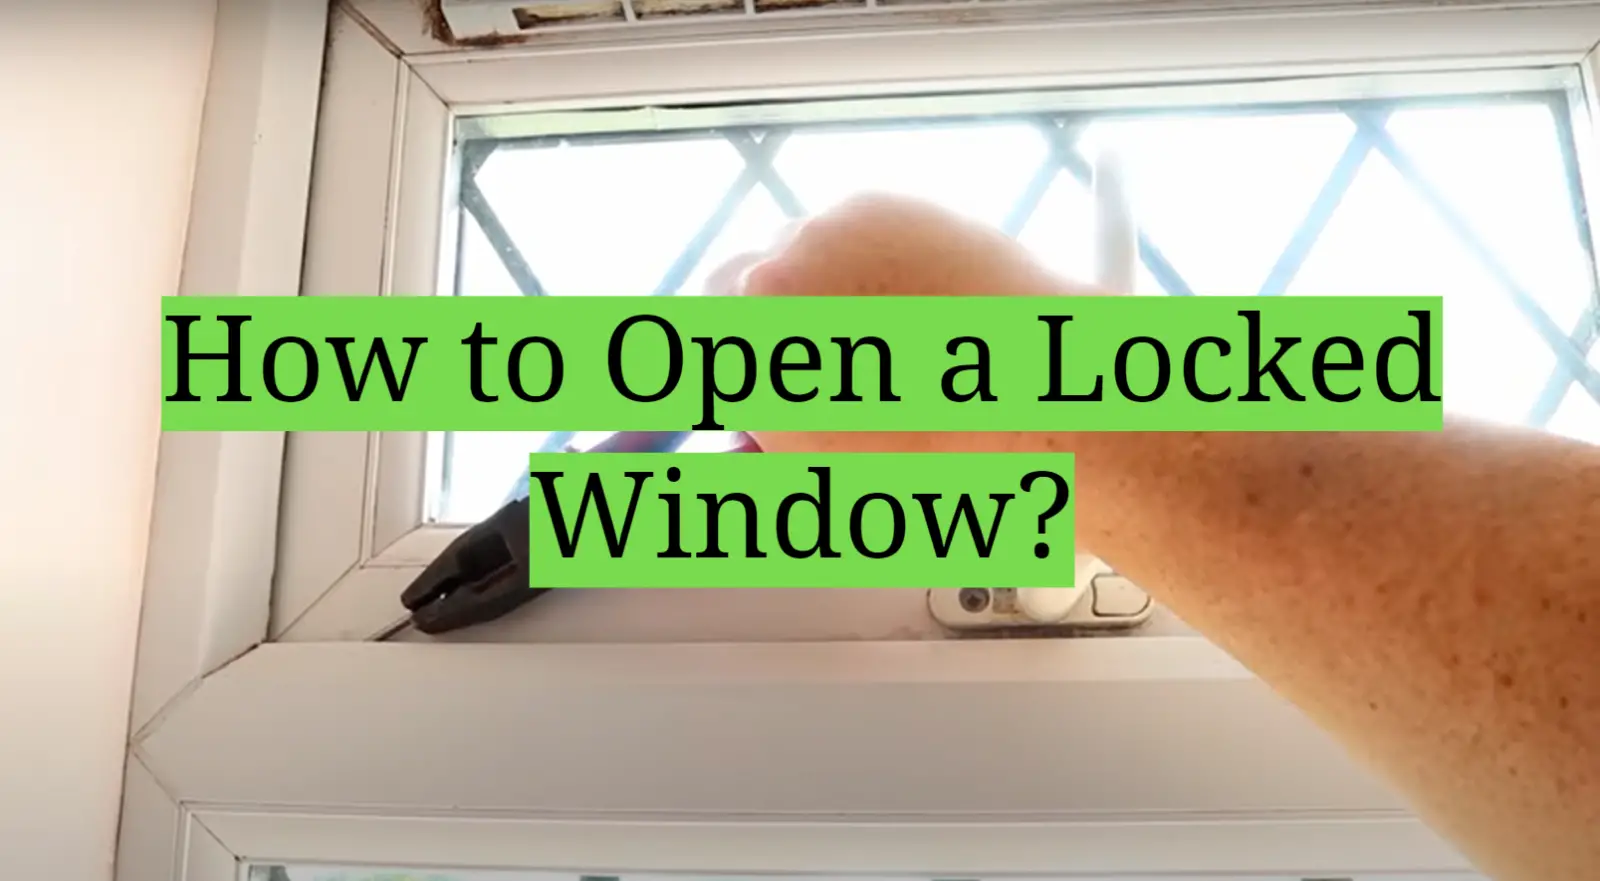 How to Open a Locked Window?